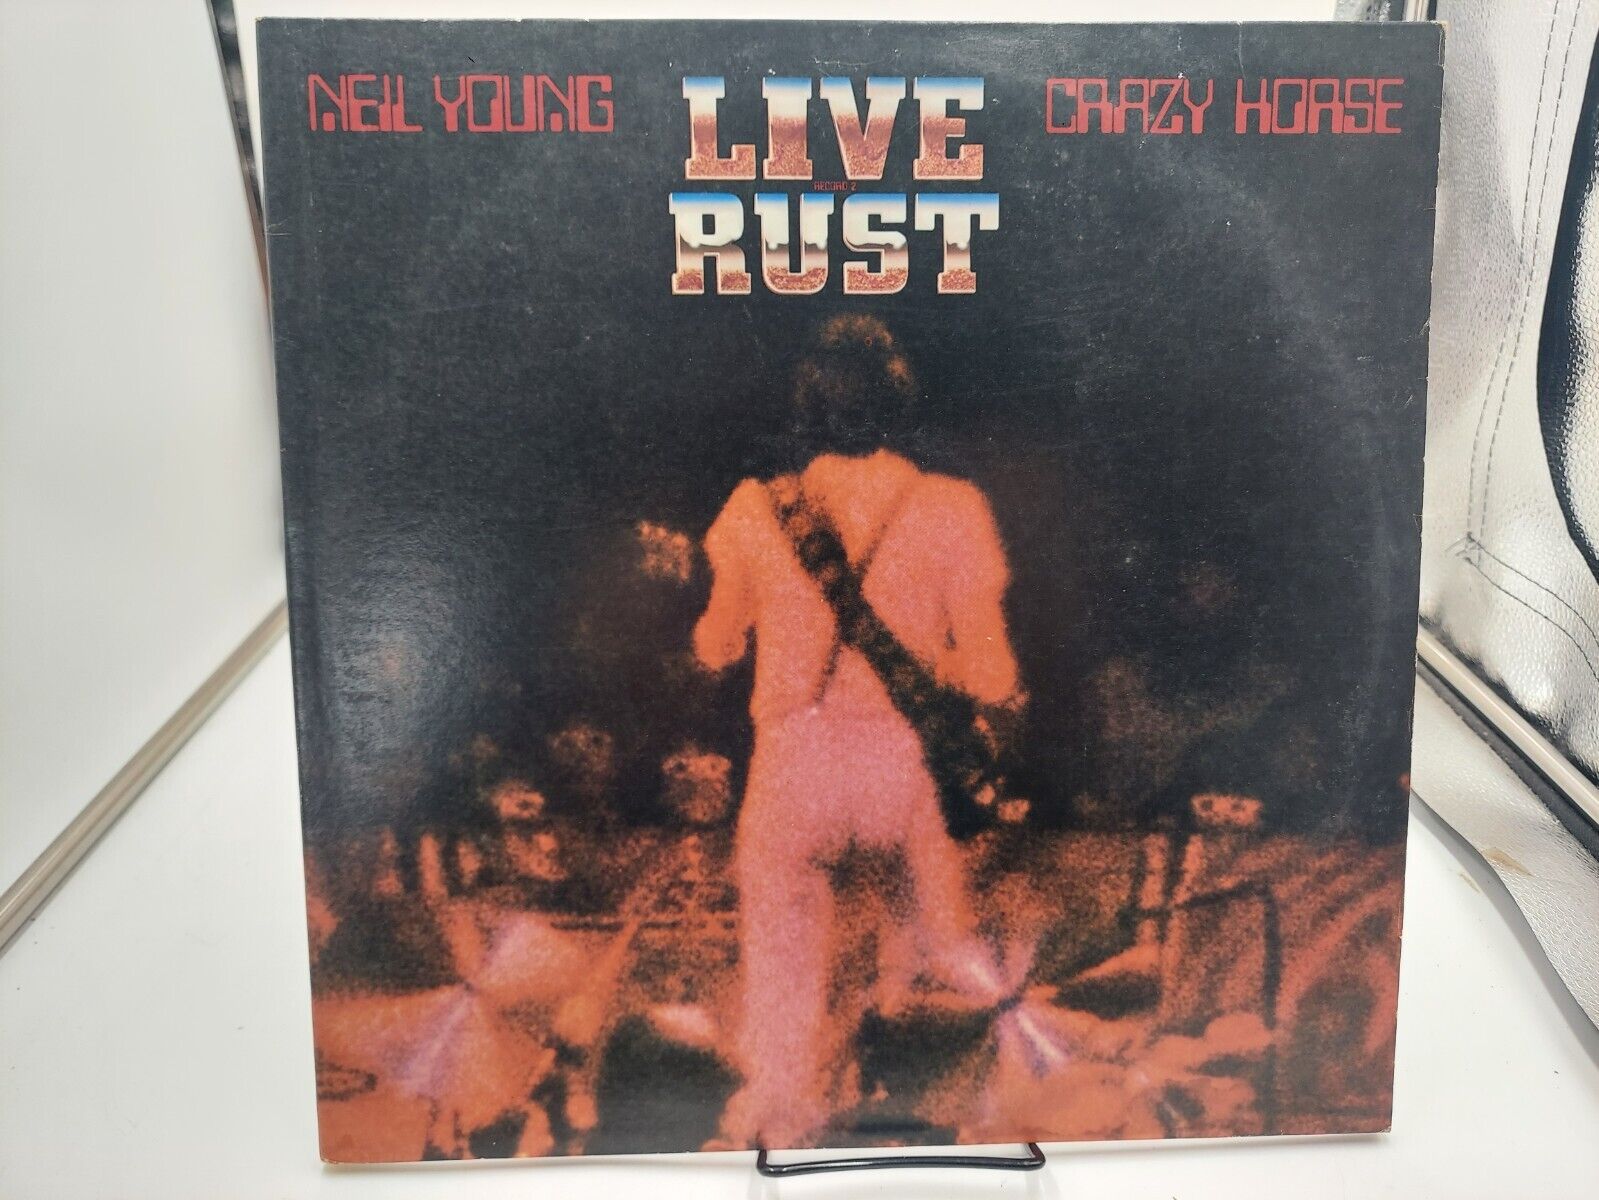 NEIL YOUNG Live Rust 2LP Record REPRISE 1979 Ultrasonic Clean EX cVG+.